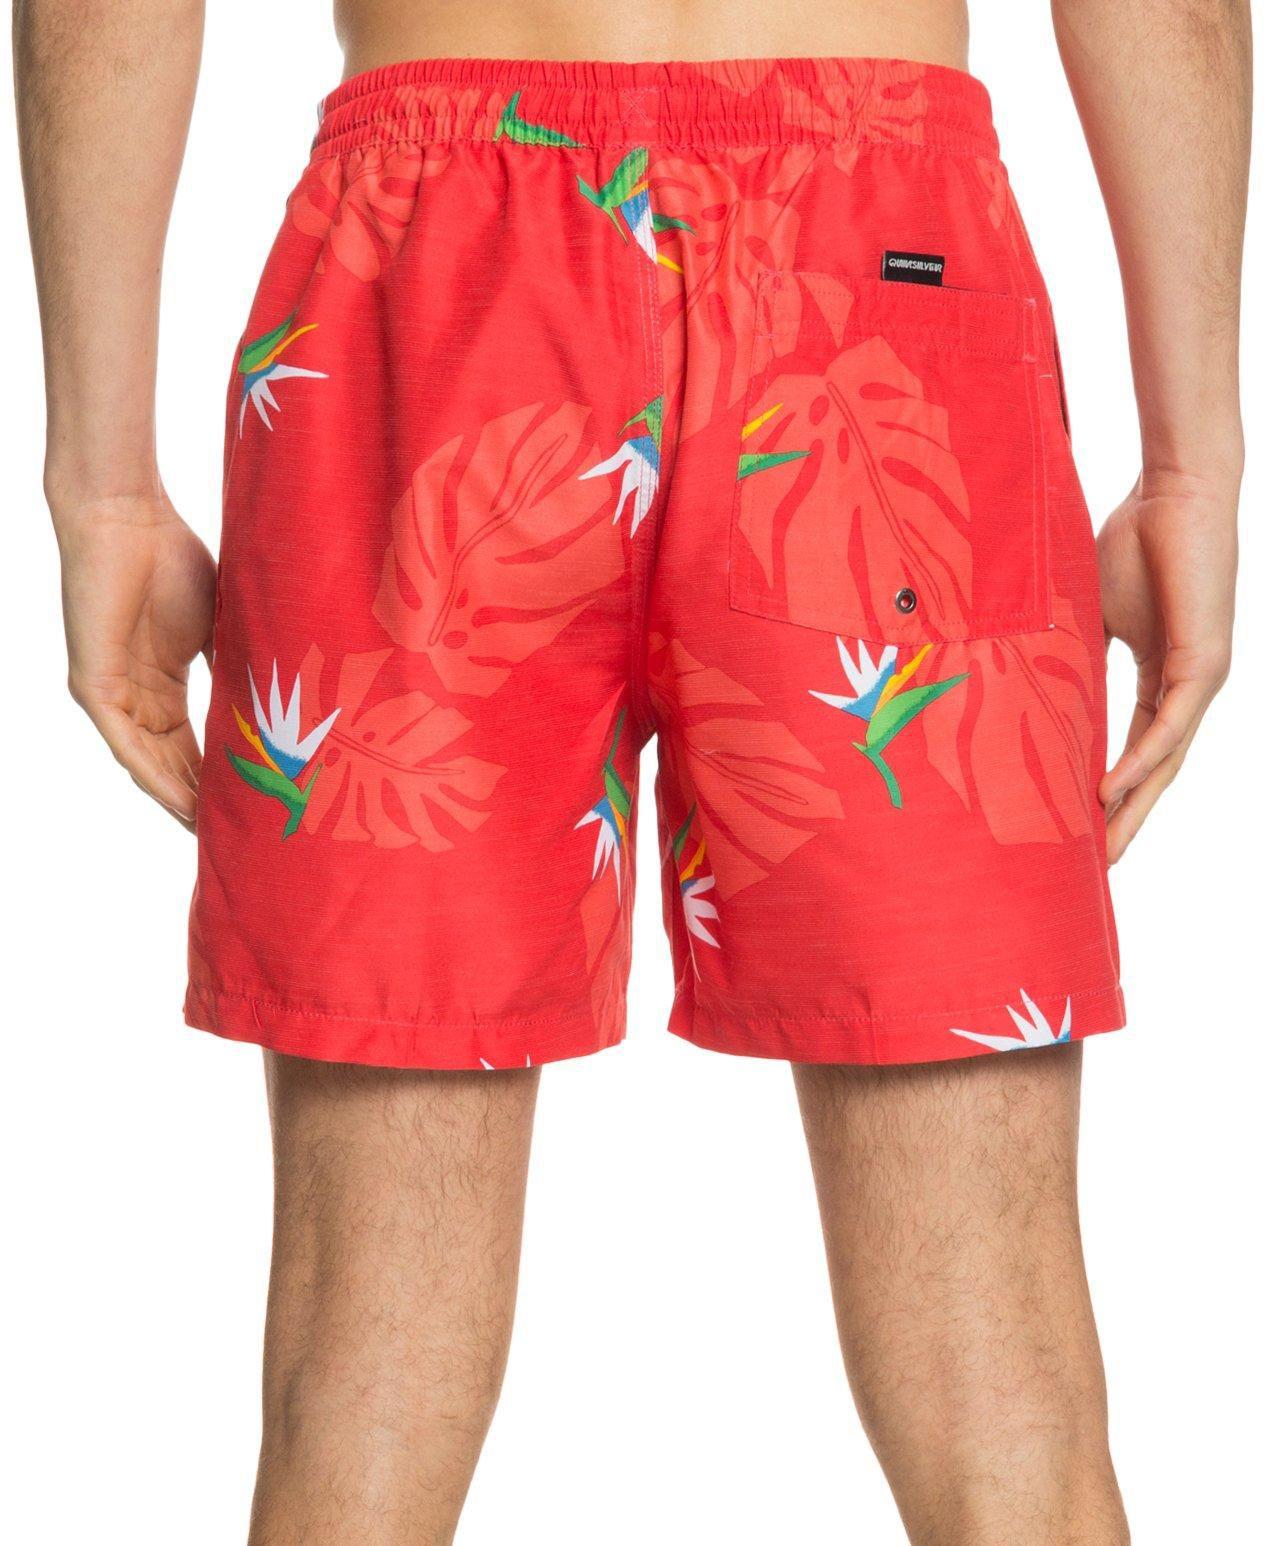 Quiksilver No Destination Volley Board Shorts in Red for Men - Lyst Quiksilver Shorts Red